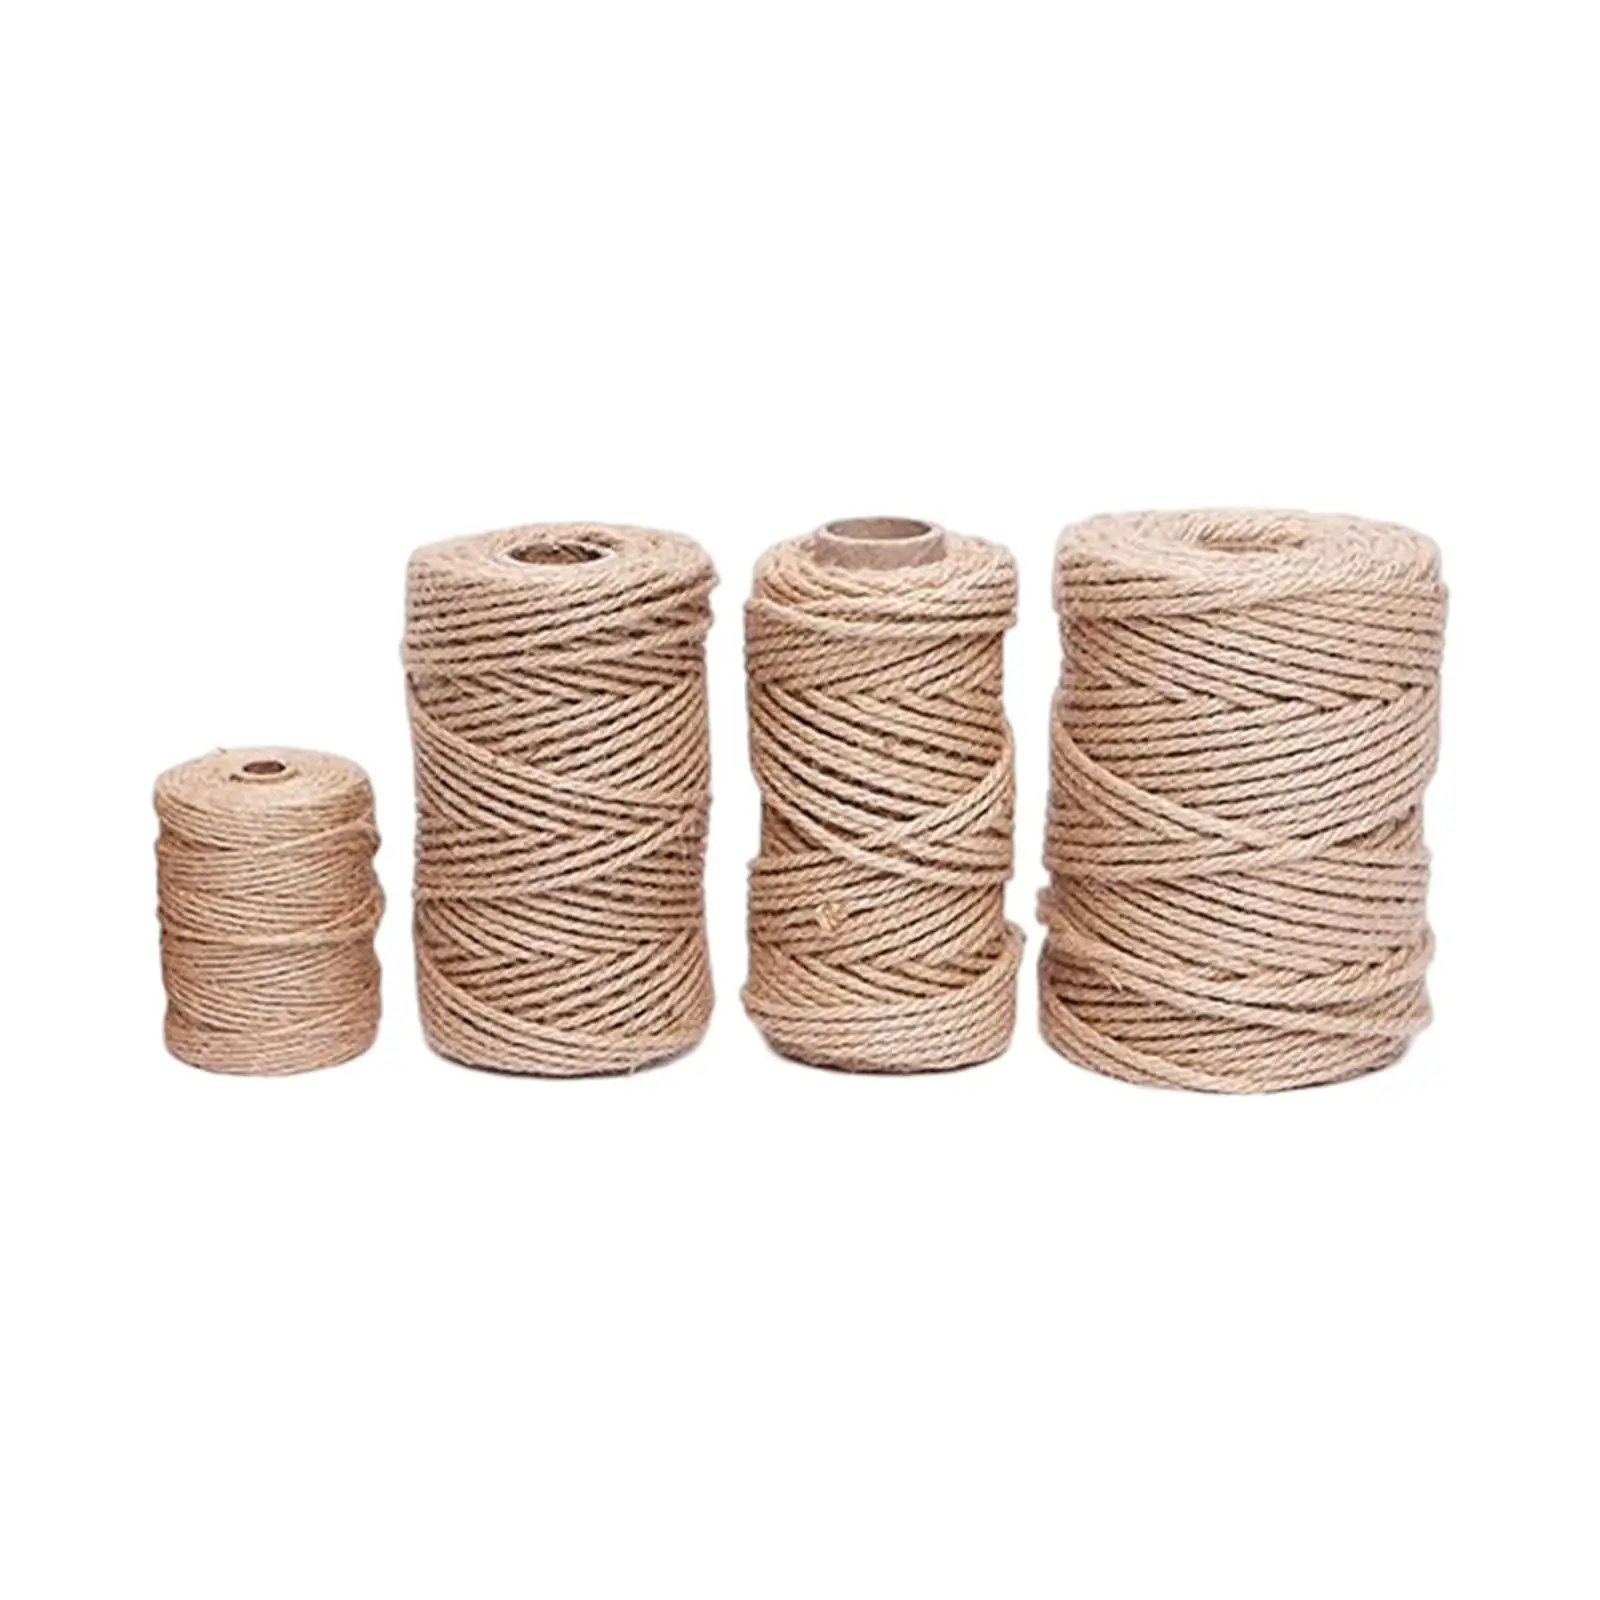 Jute Twine Artwork Durable Handcraft Hemp Rope Twisted Sisal Rope for Cats Scratching Post Toys Decor Cat Scratcher Wedding